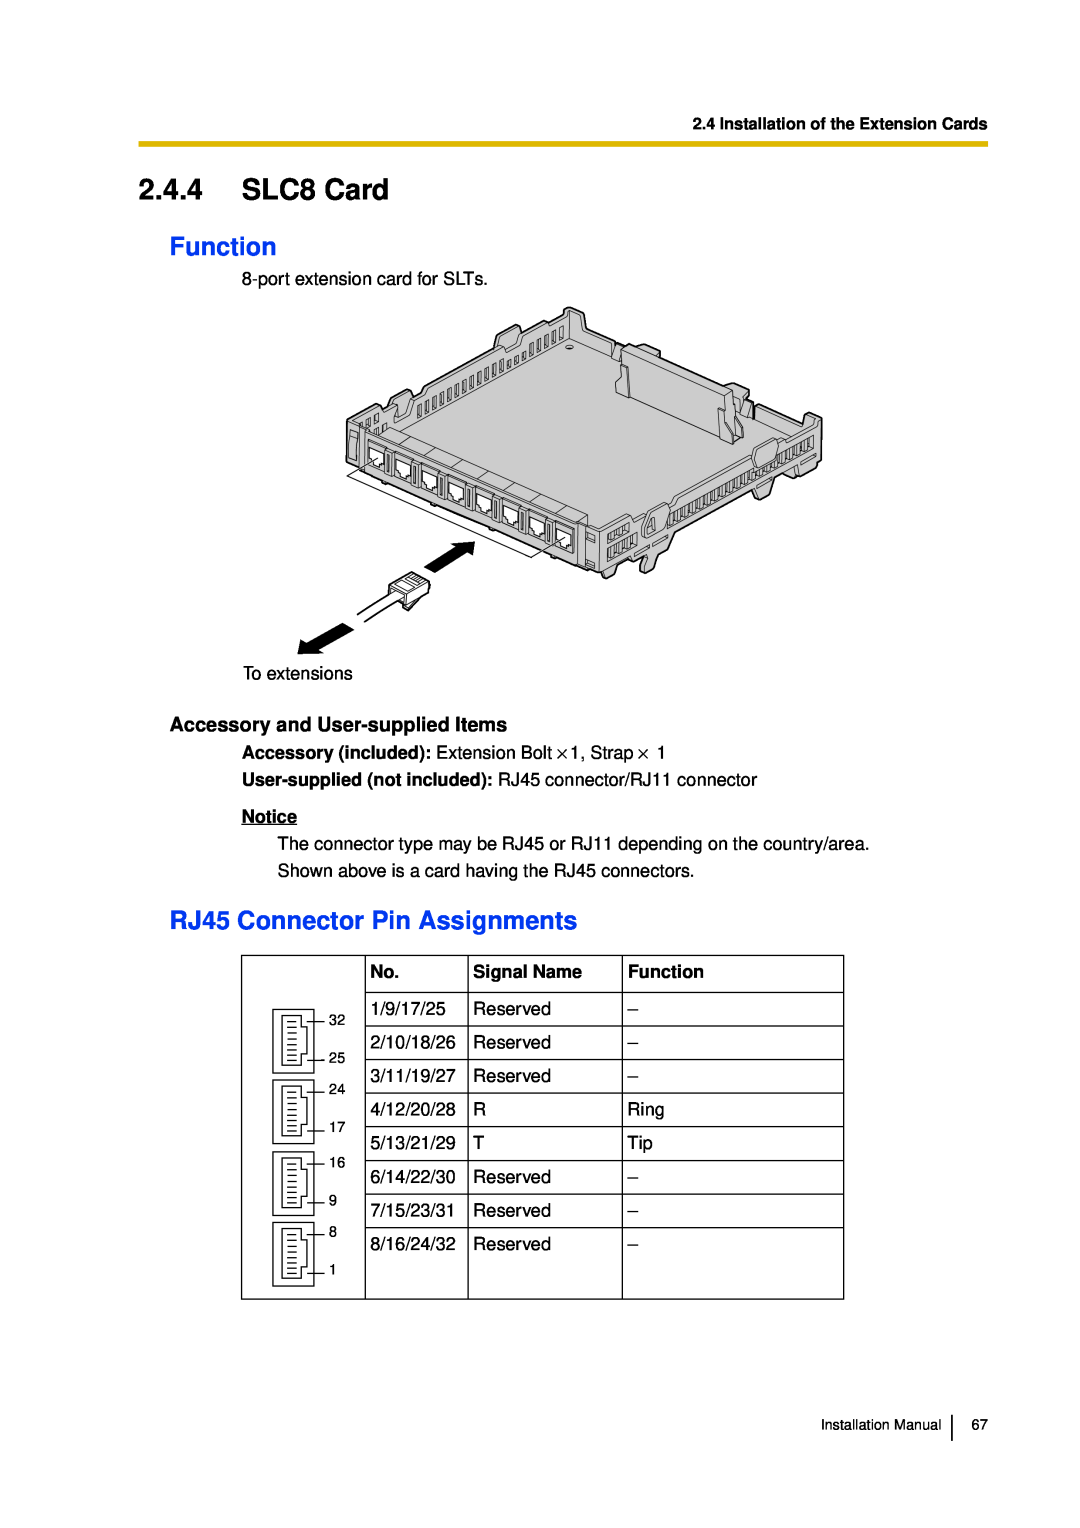 Panasonic KX-TDA30 installation manual 2.4.4SLC8 Card, Function, RJ45 Connector Pin Assignments, Notice, Signal Name 